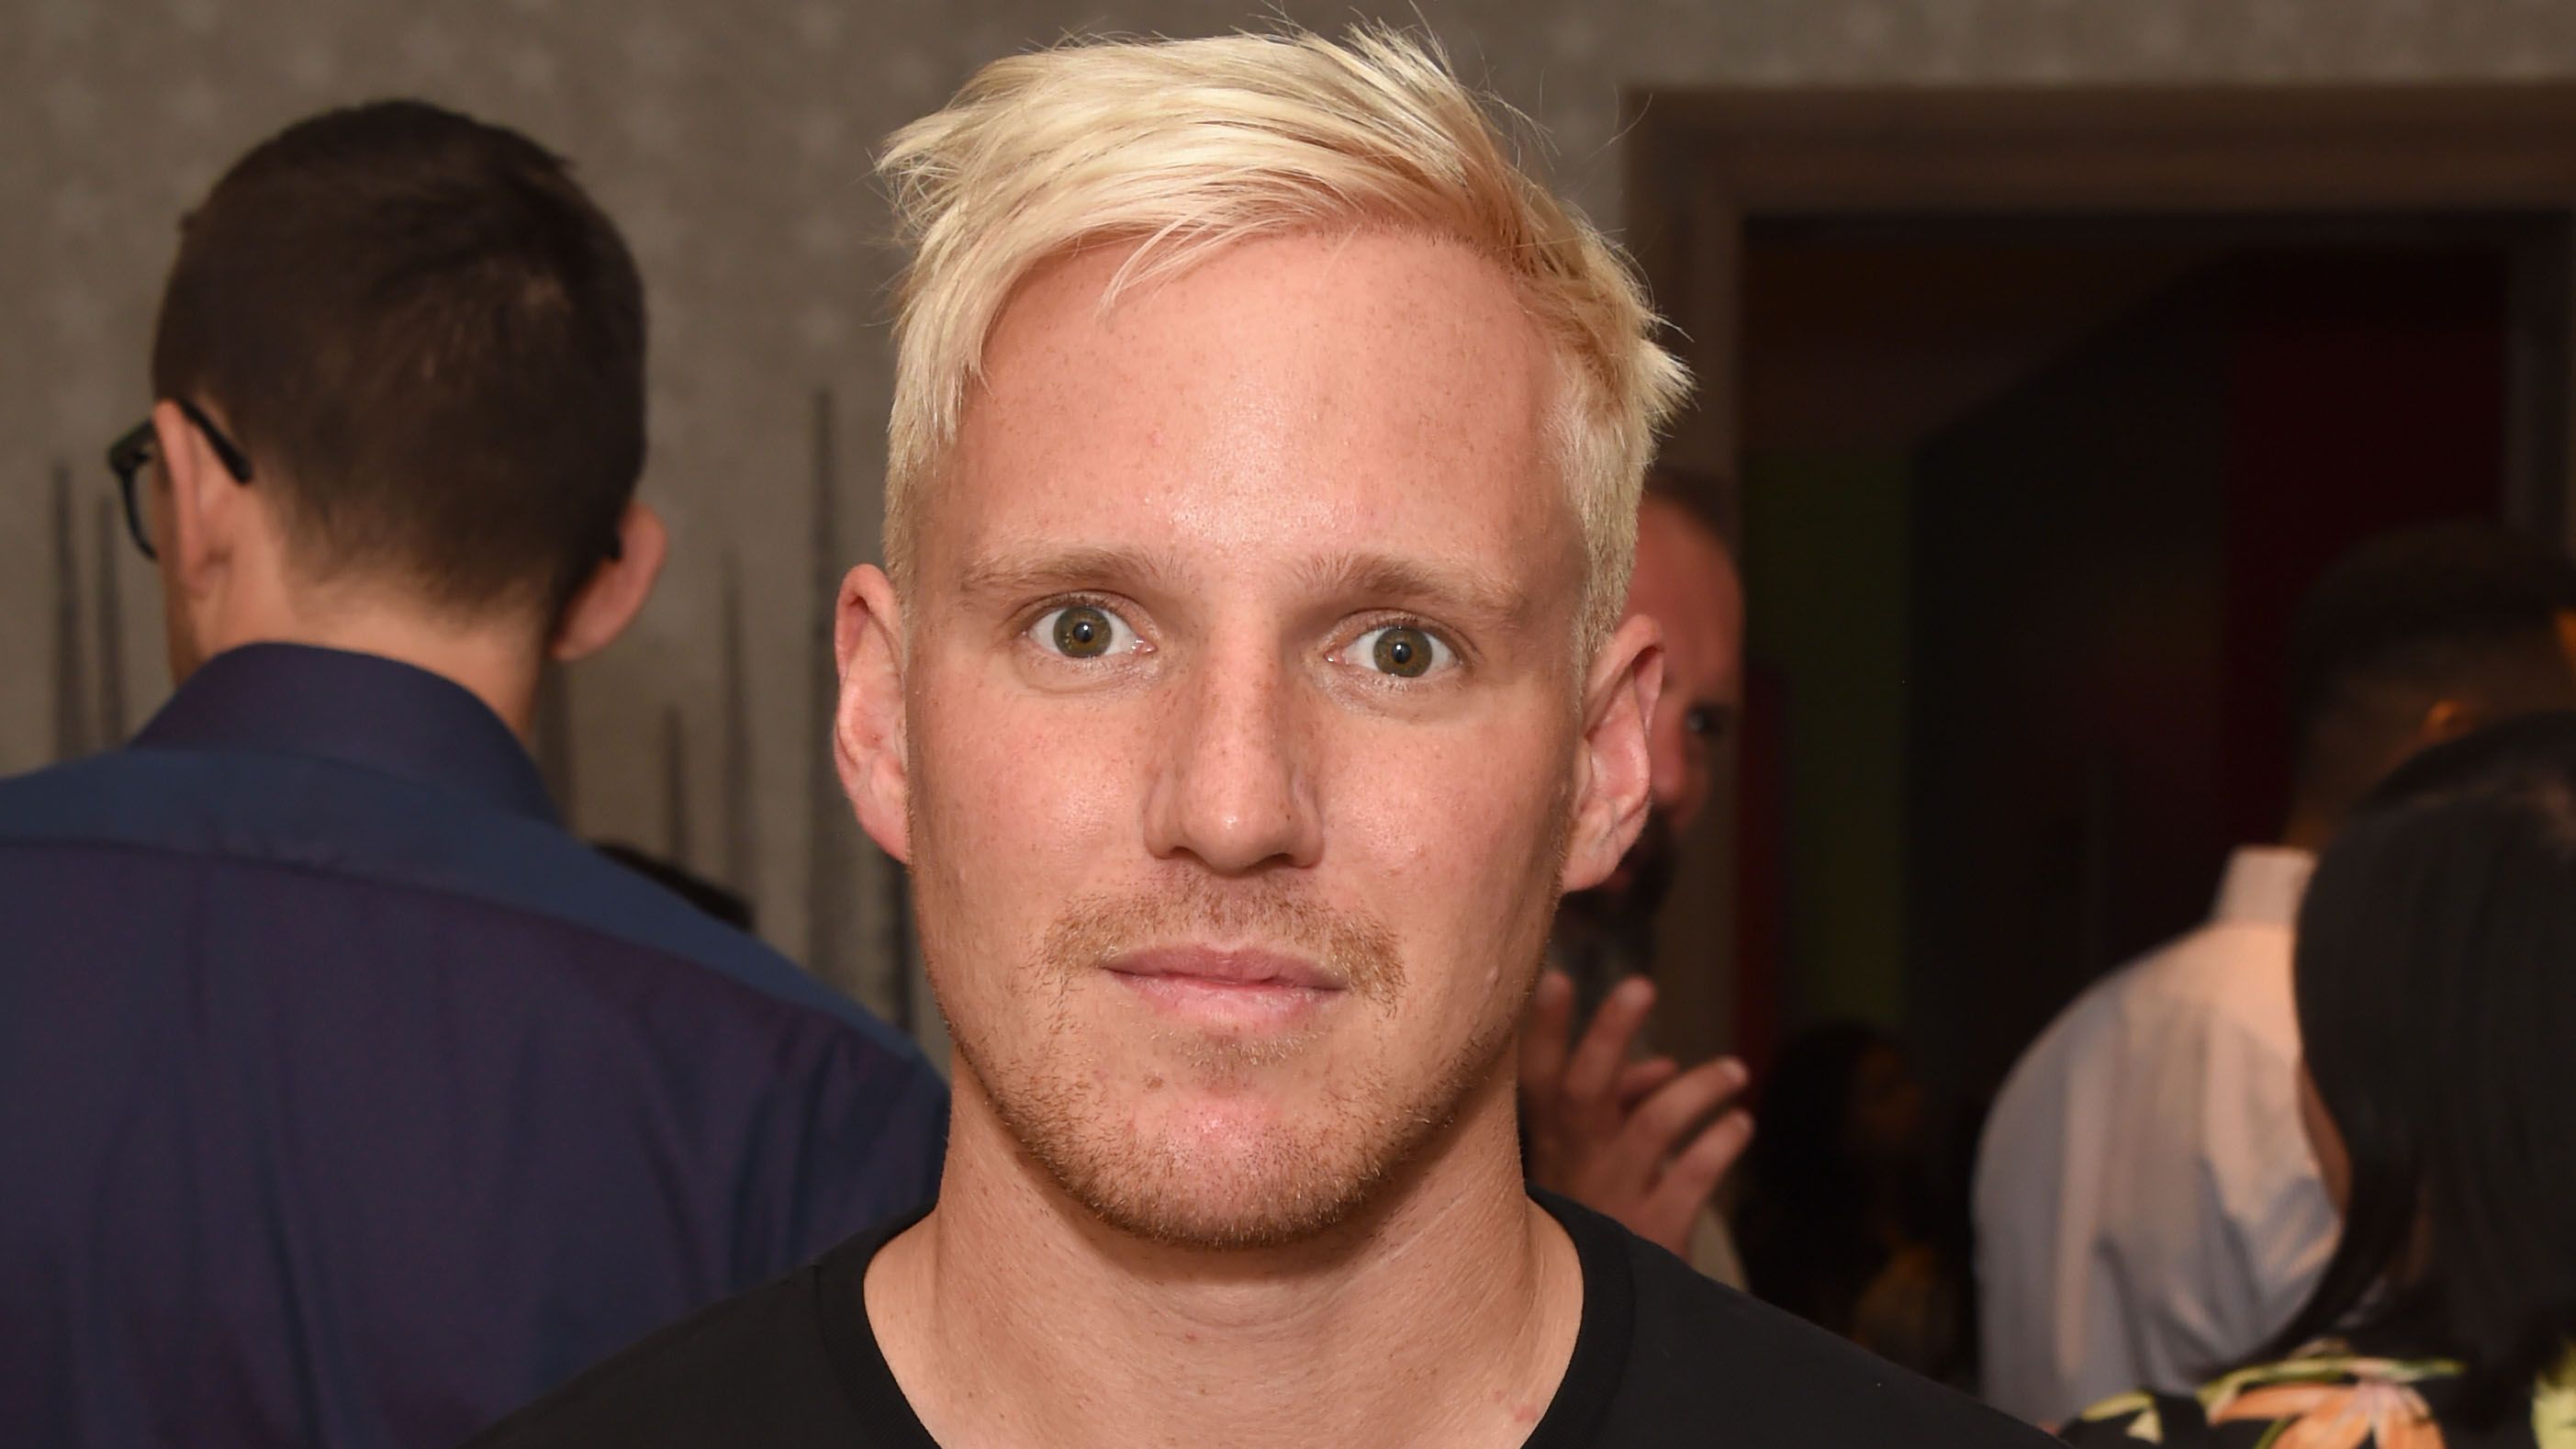 Made In Chelseas Jamie Laing Confirmed For Strictly Come Dancing Television Downtown Radio 